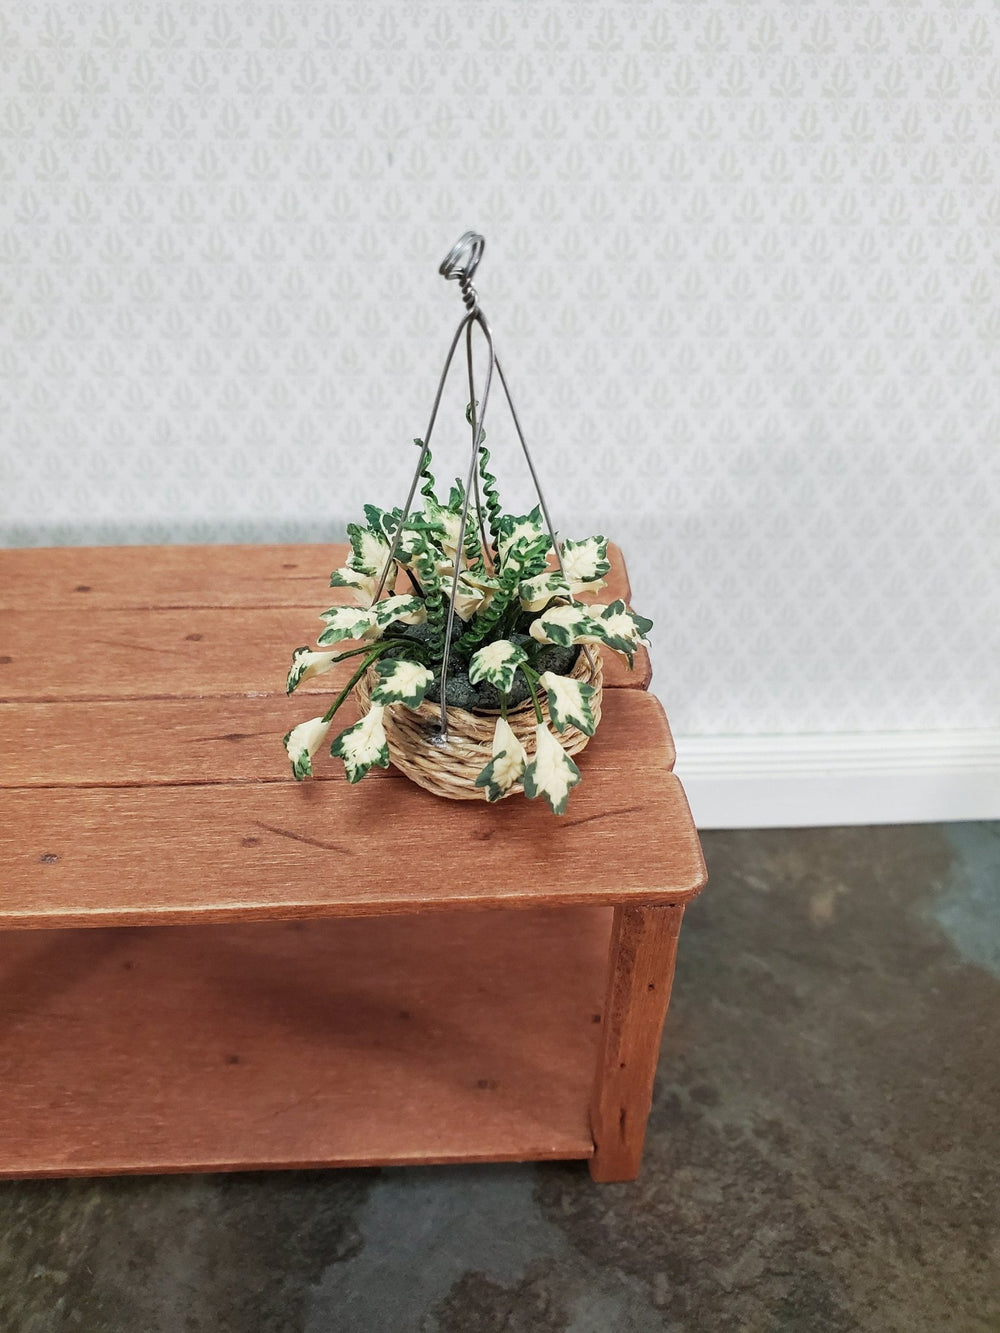 Dollhouse Hanging Plant Variegated English Ivy in Natural Basket 1:12 Scale Miniature - Miniature Crush